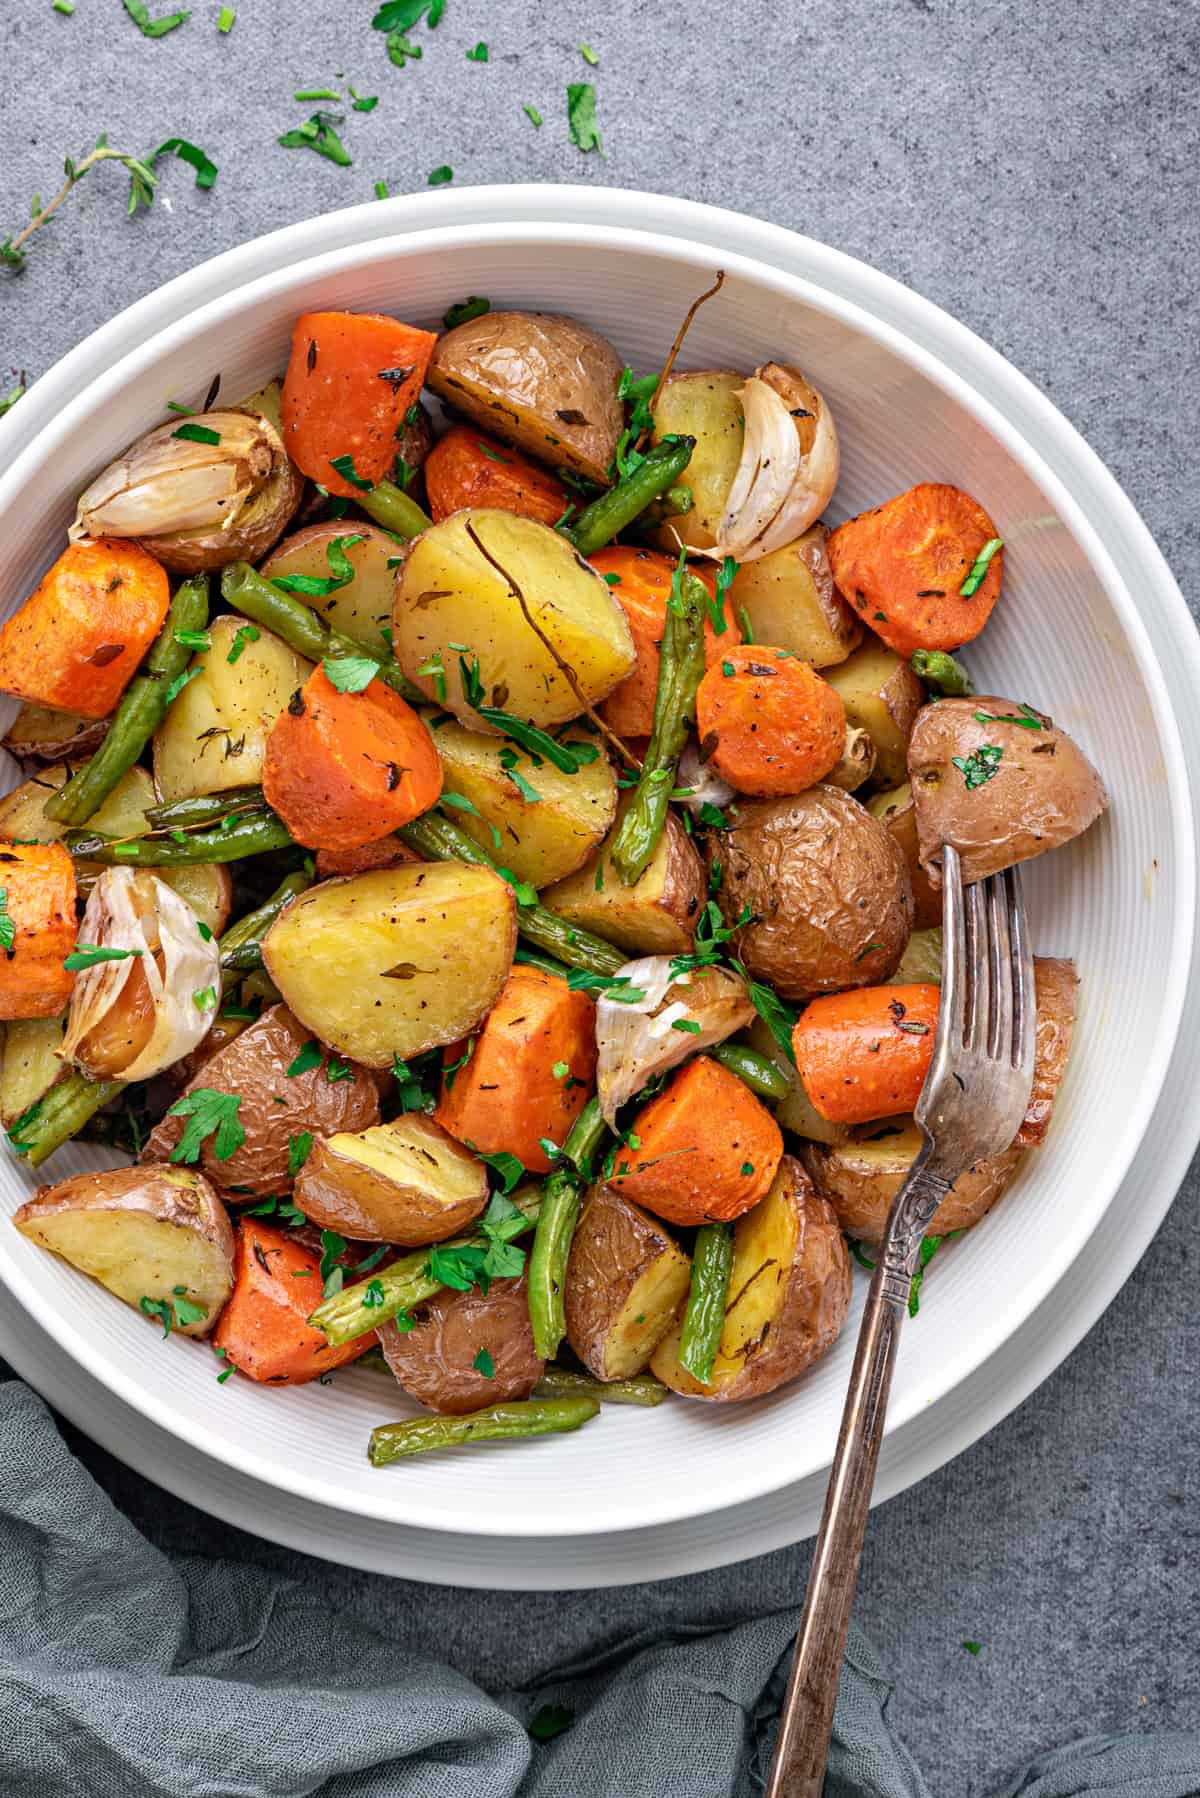 https://www.cubesnjuliennes.com/wp-content/uploads/2021/11/Roasted-Potatoes-and-Carrots-1.jpg